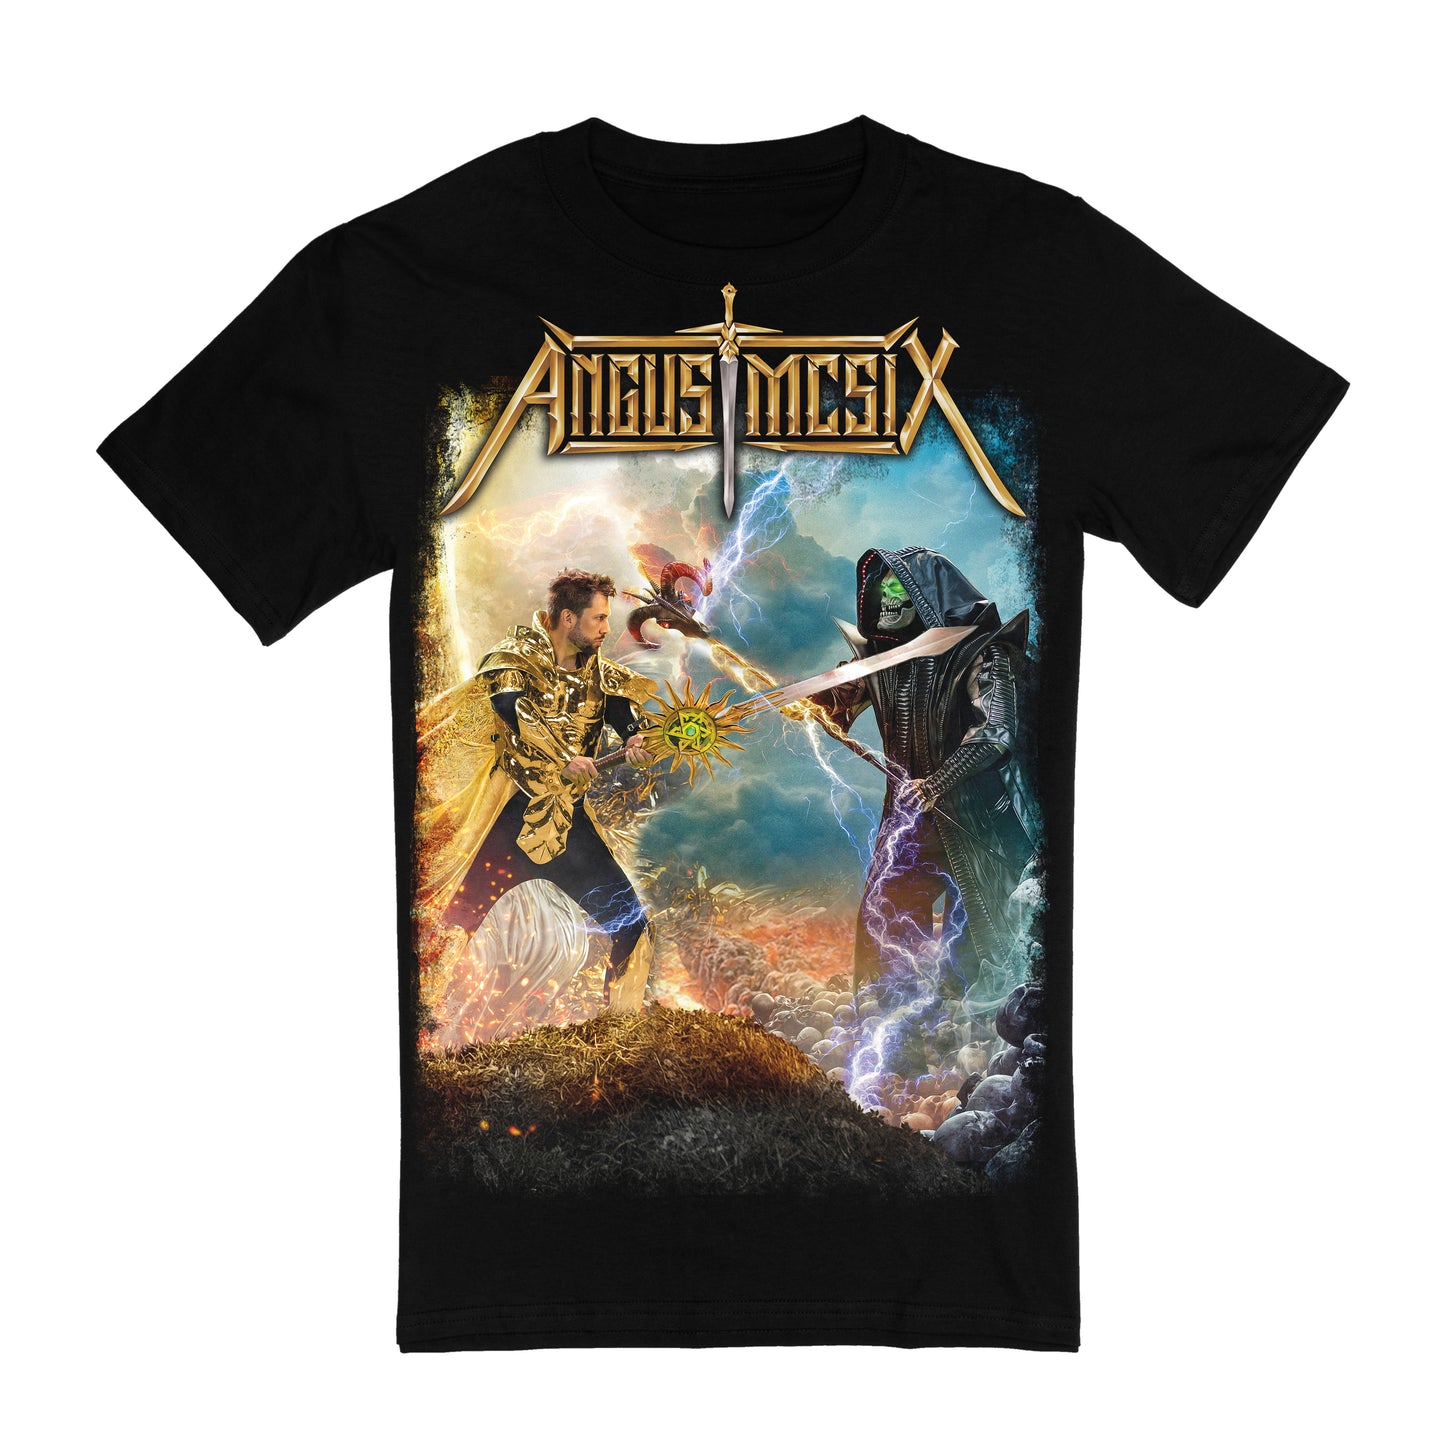 T-shirt "ANGUS McSIX AND THE SWORD OF POWER"